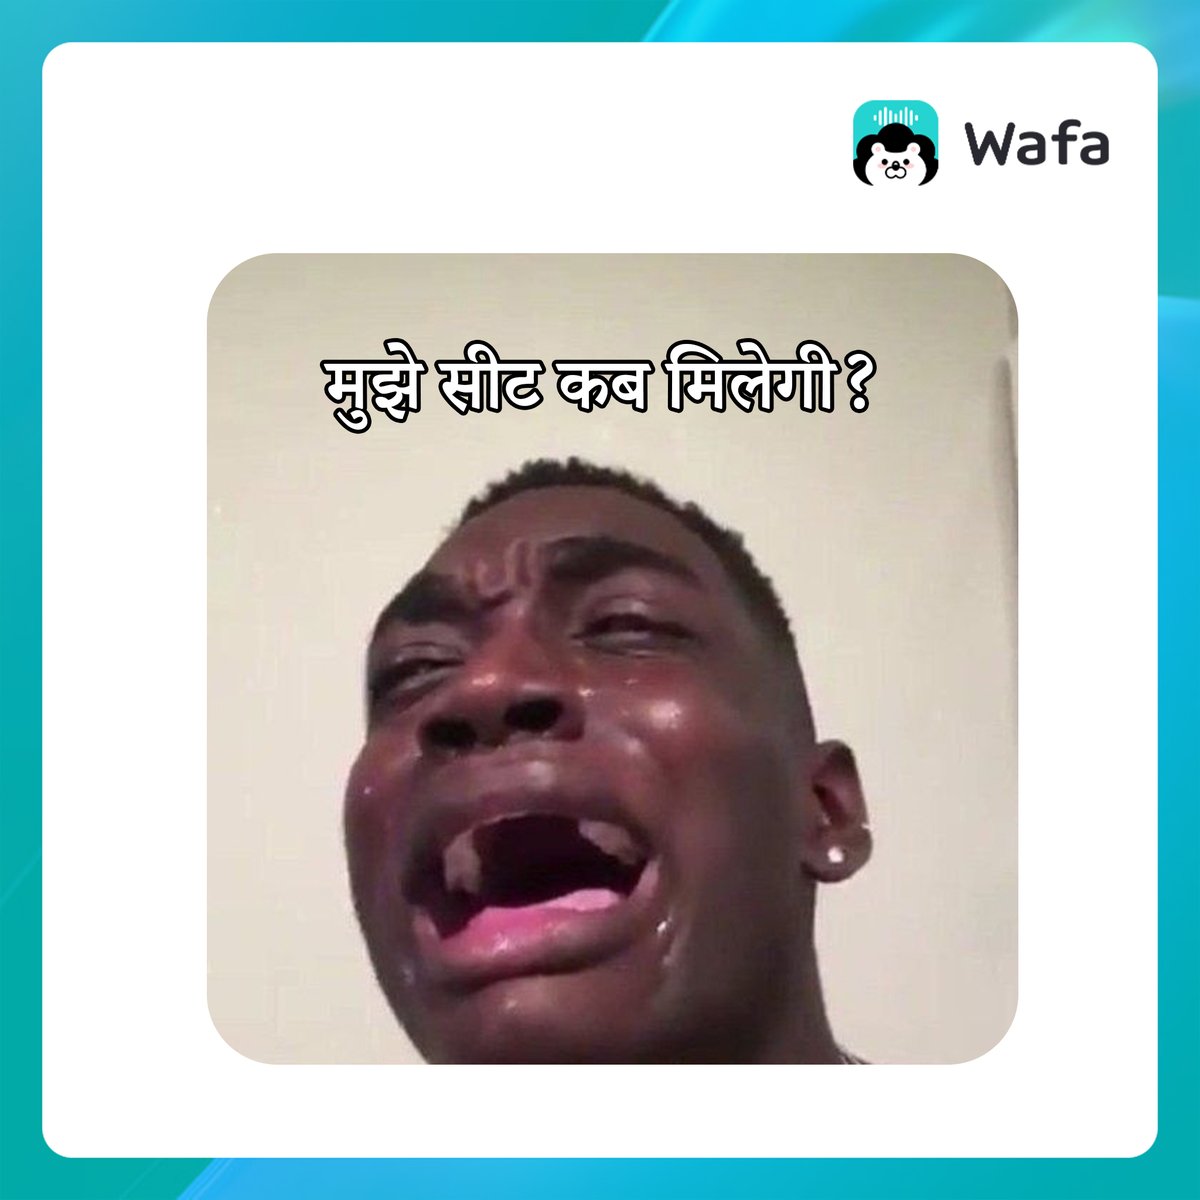 Hahaha, does this happen with you too? 🧐

#wafa #voiceapp #meme